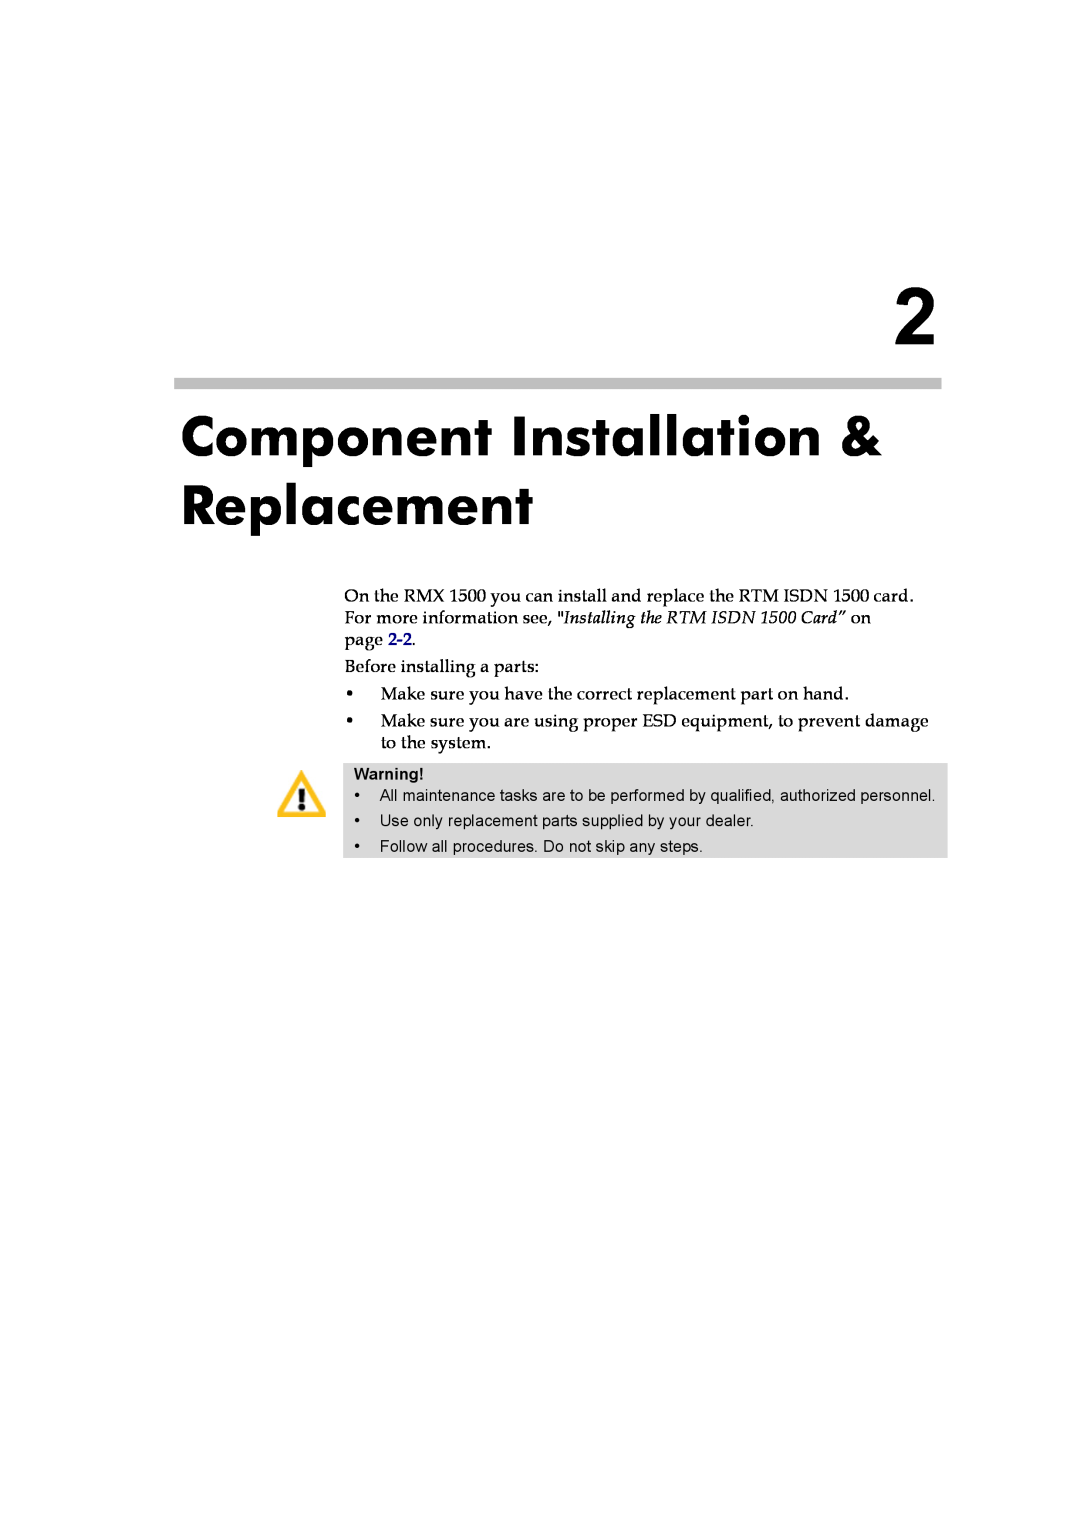 Polycom DOC2557A manual Component Installation & Replacement 